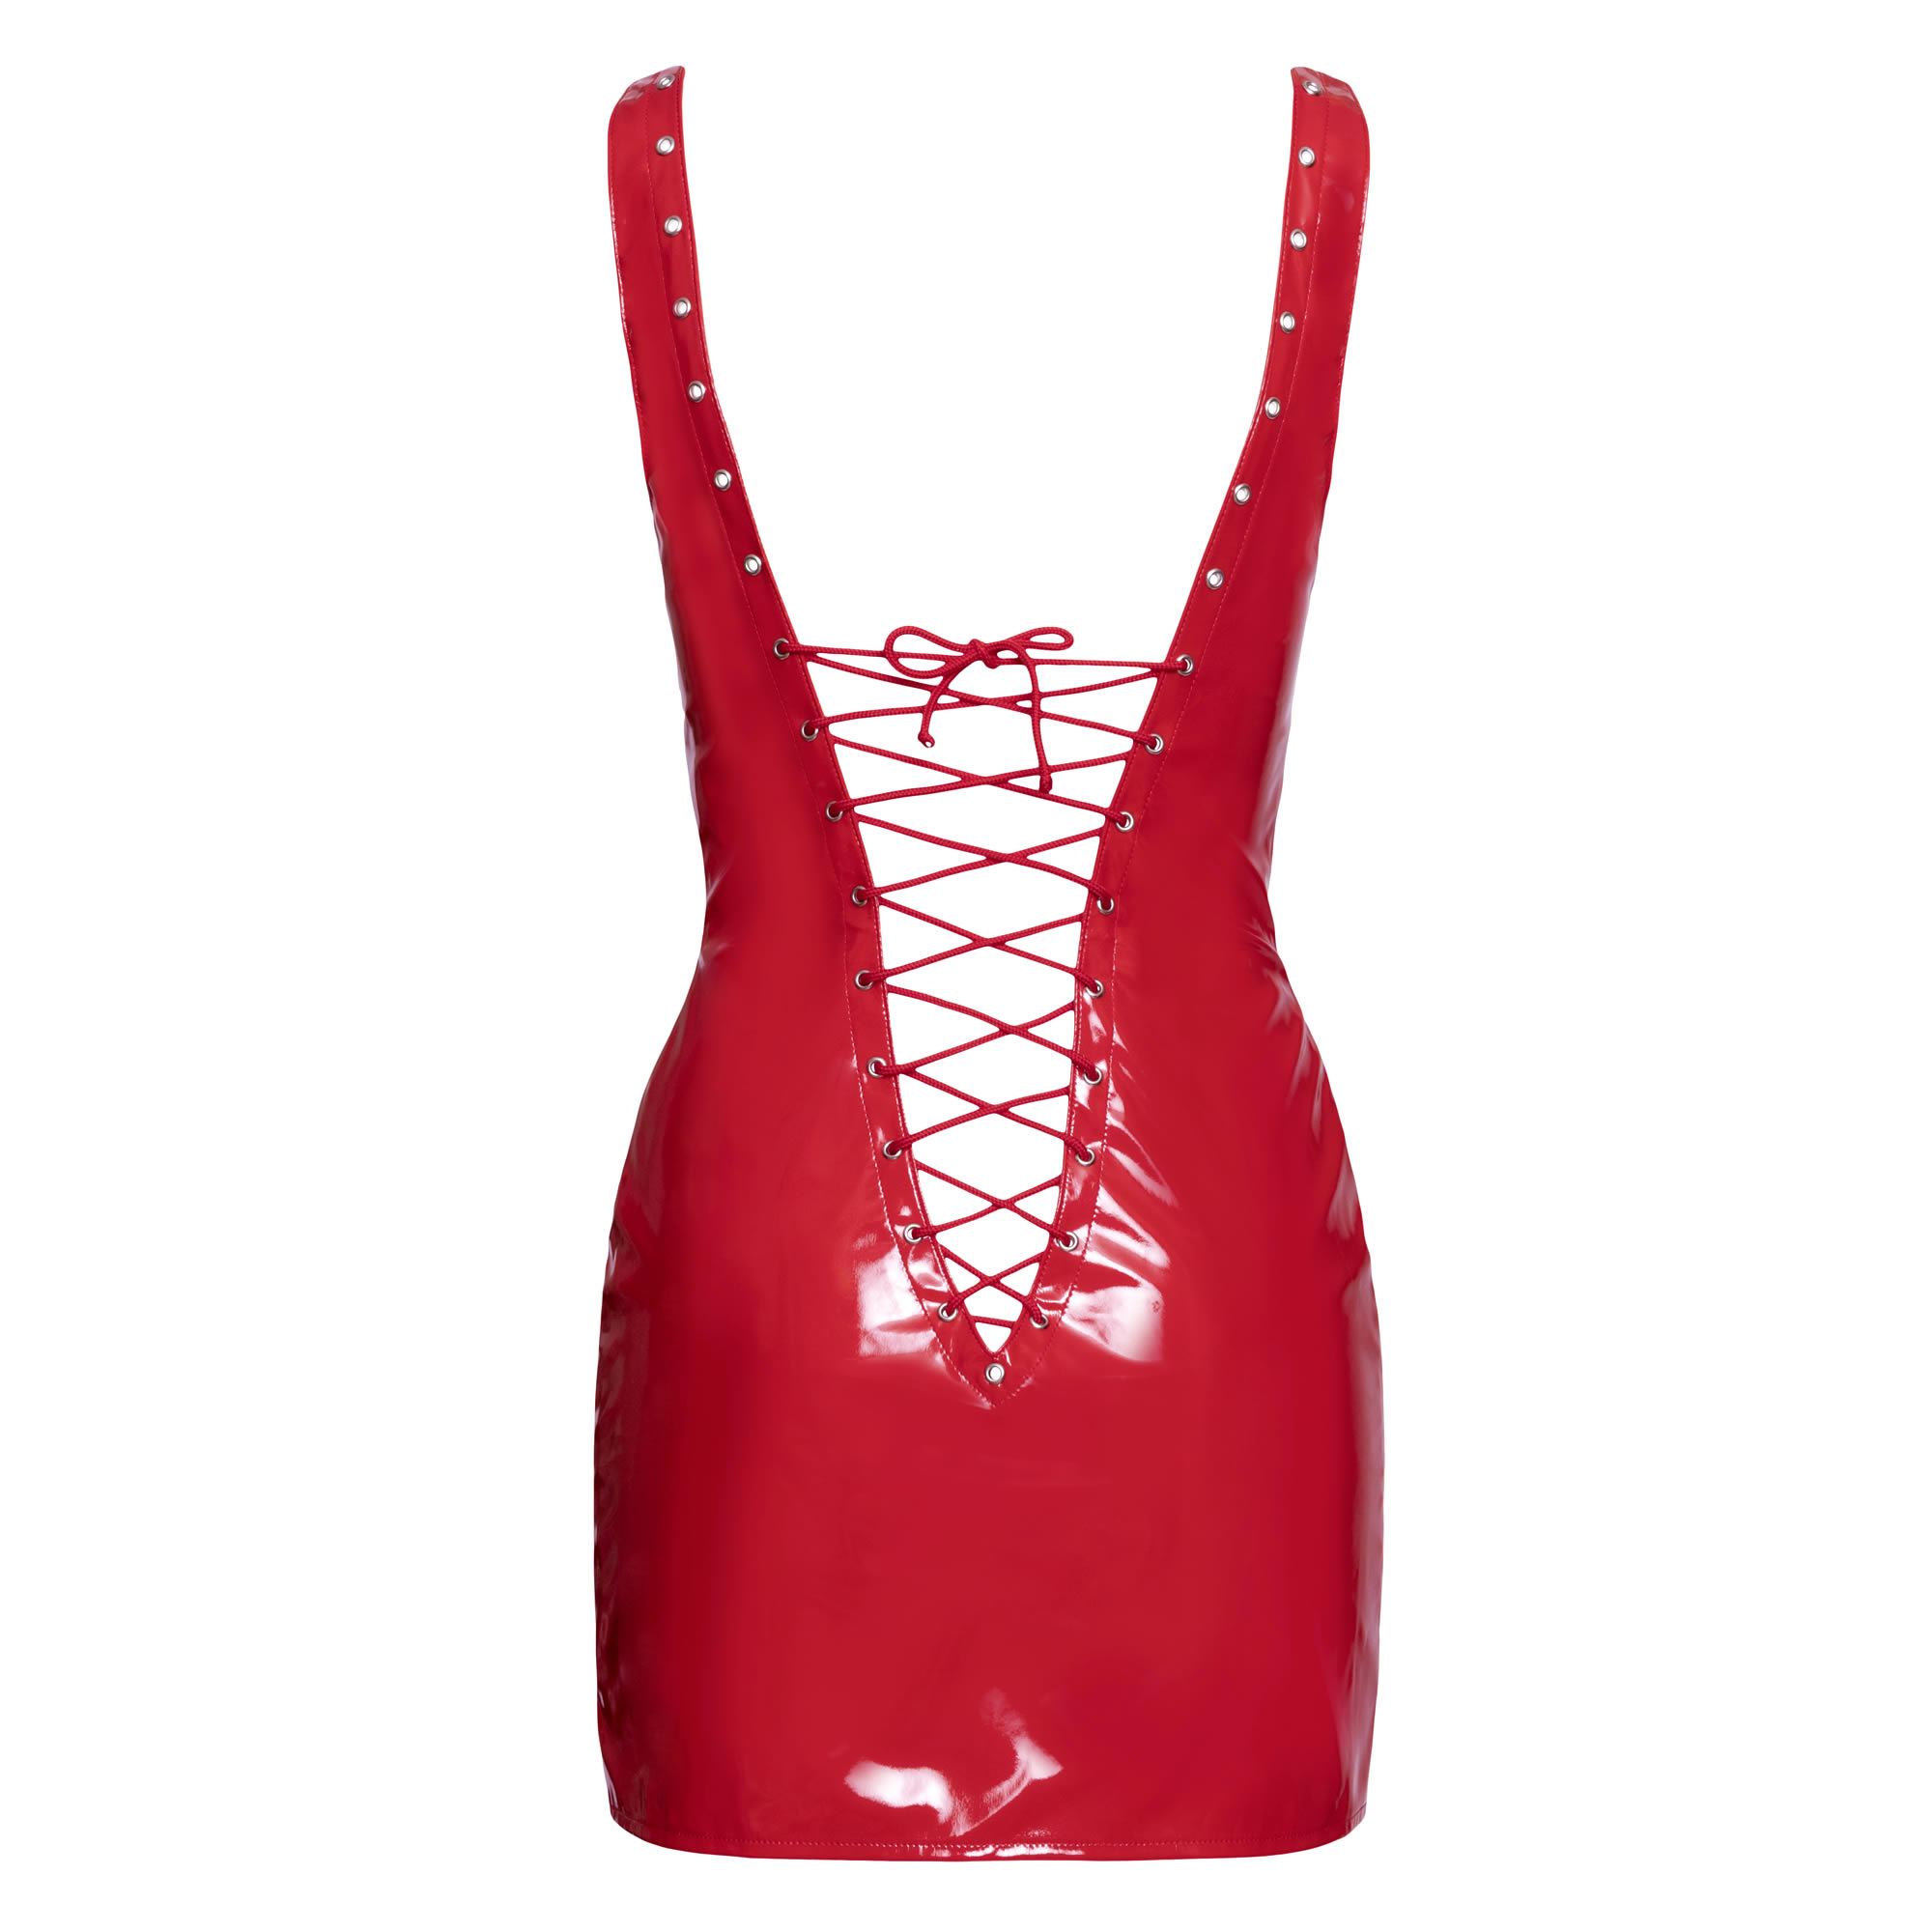 Red Vinyl Dress with Lacing